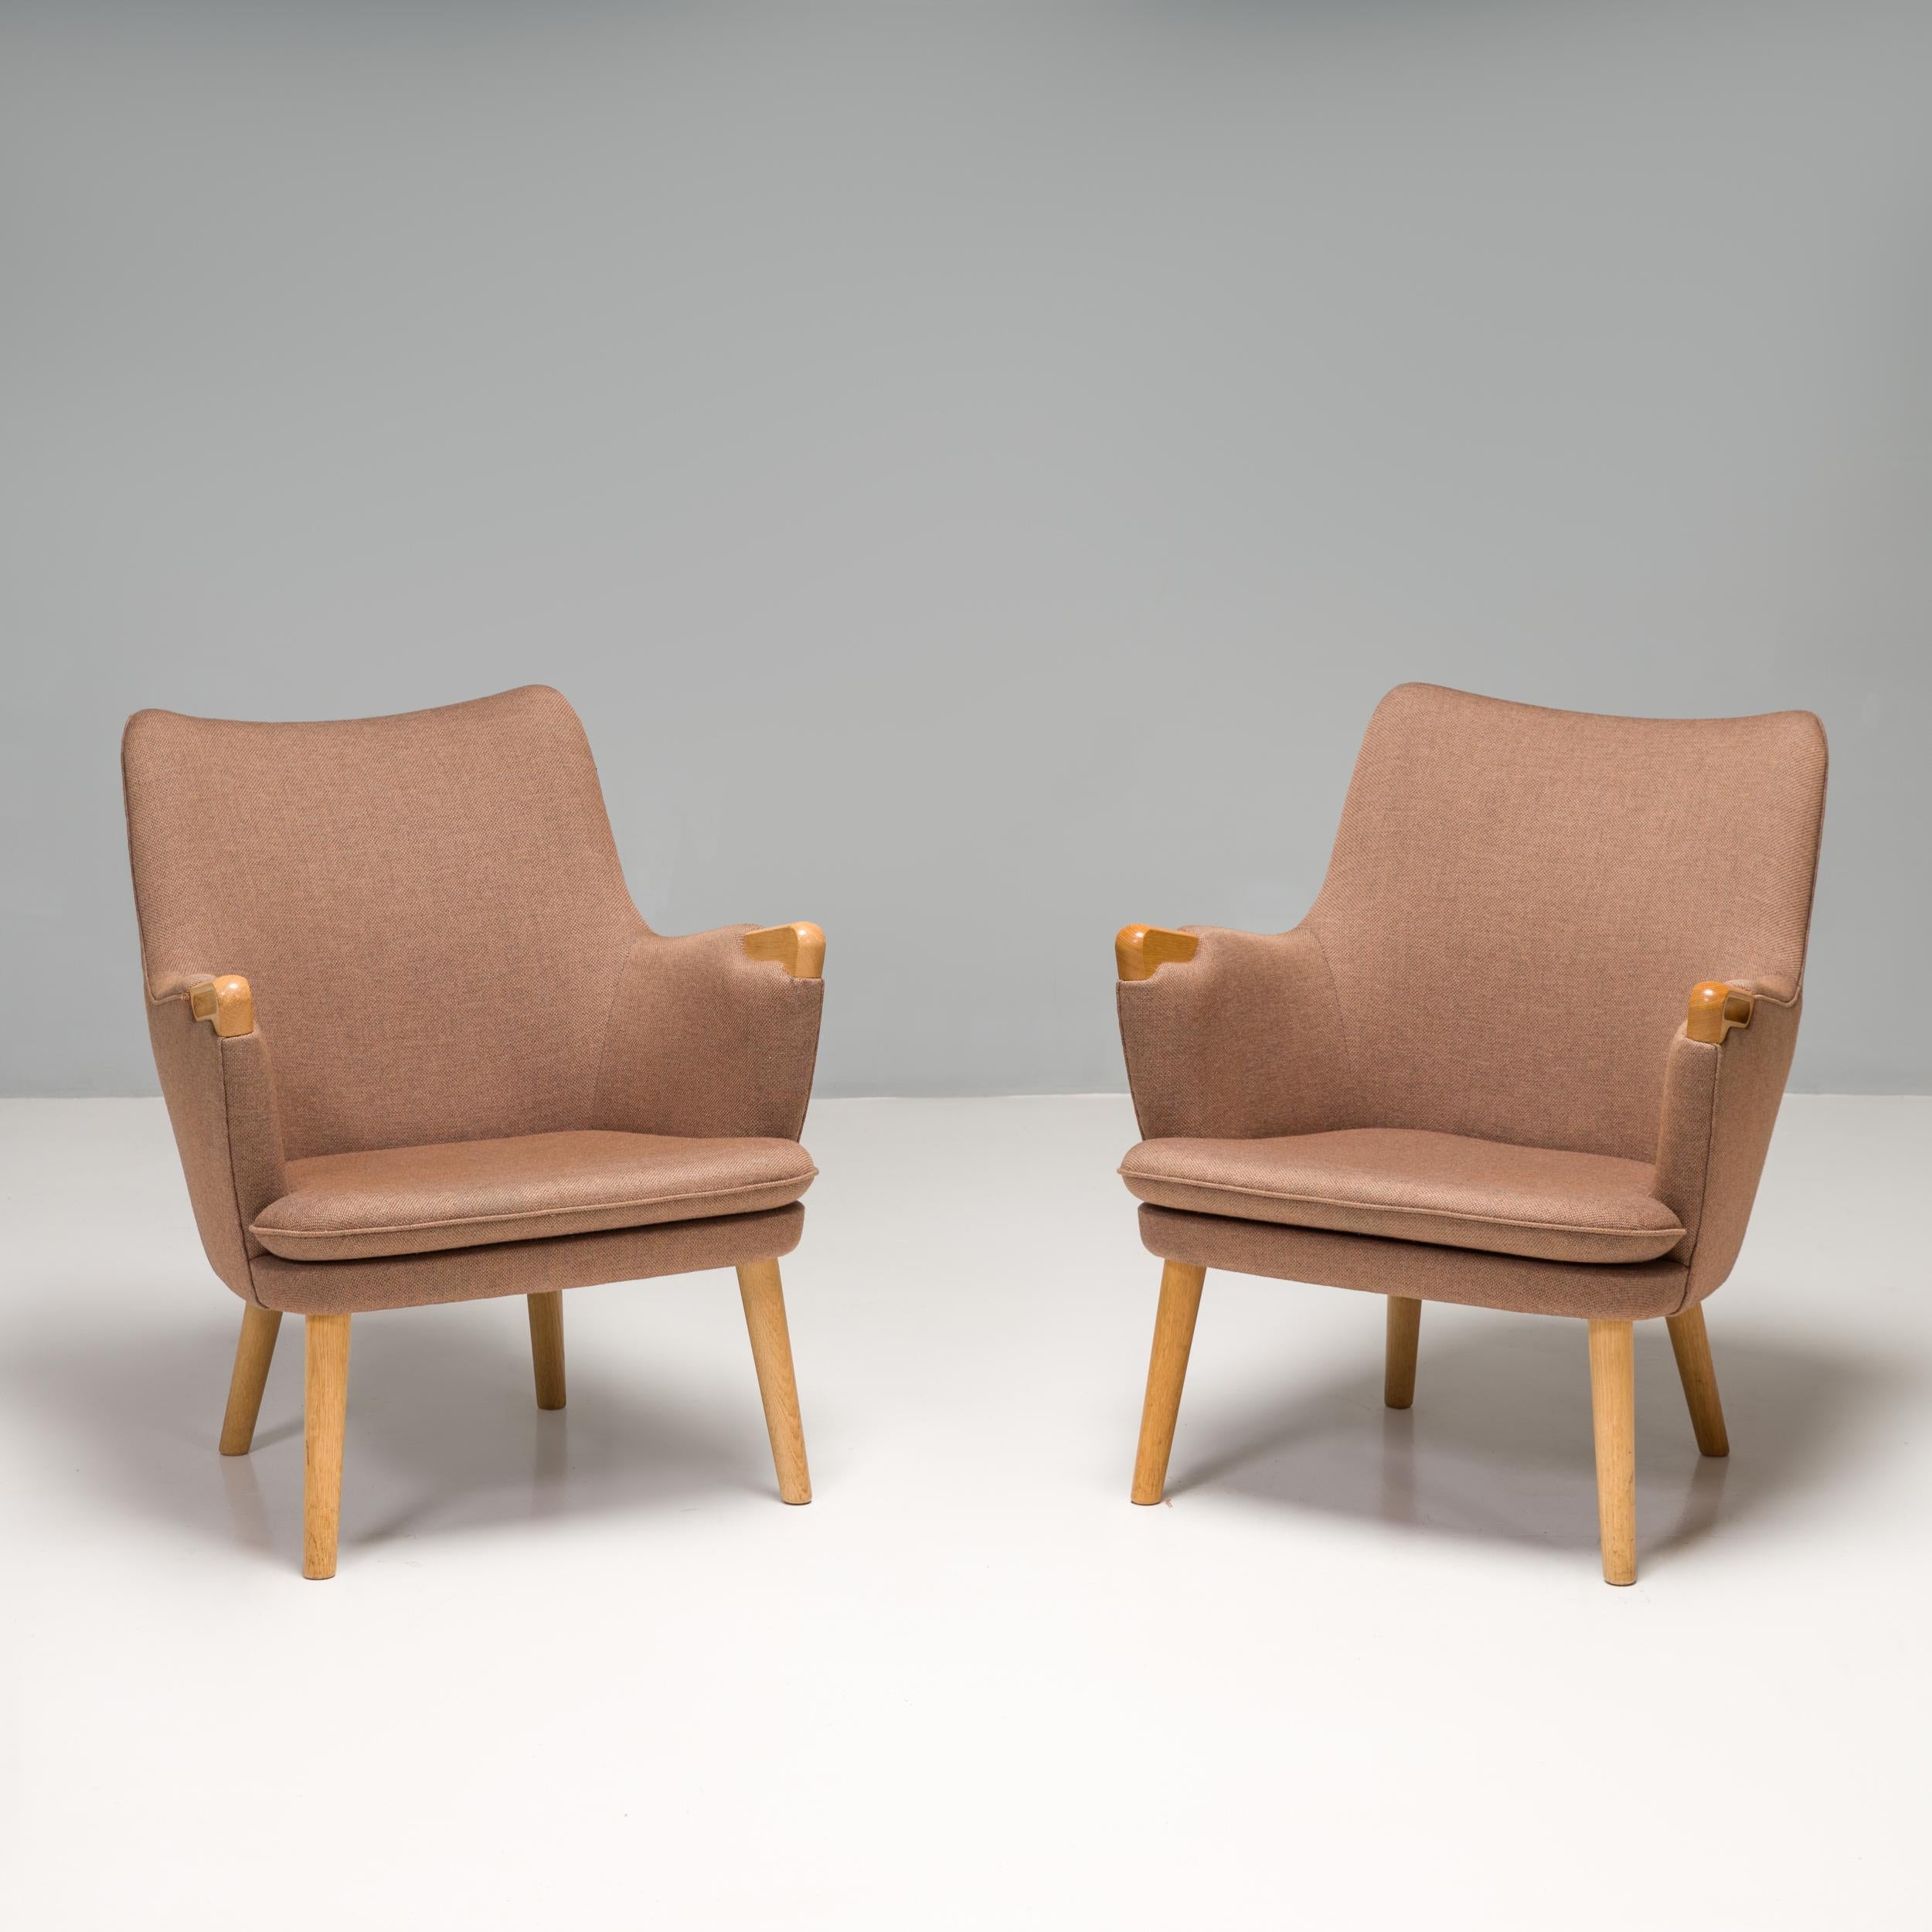 Originally designed by Hans J. Wegner in 1952 for the Magasin du Nord store in Copenhagen, the CH71 armchair is manufactured by Carl Hansen & Son and is a fantastic example of mid century Scandinavian design.

Combining both upholstery with